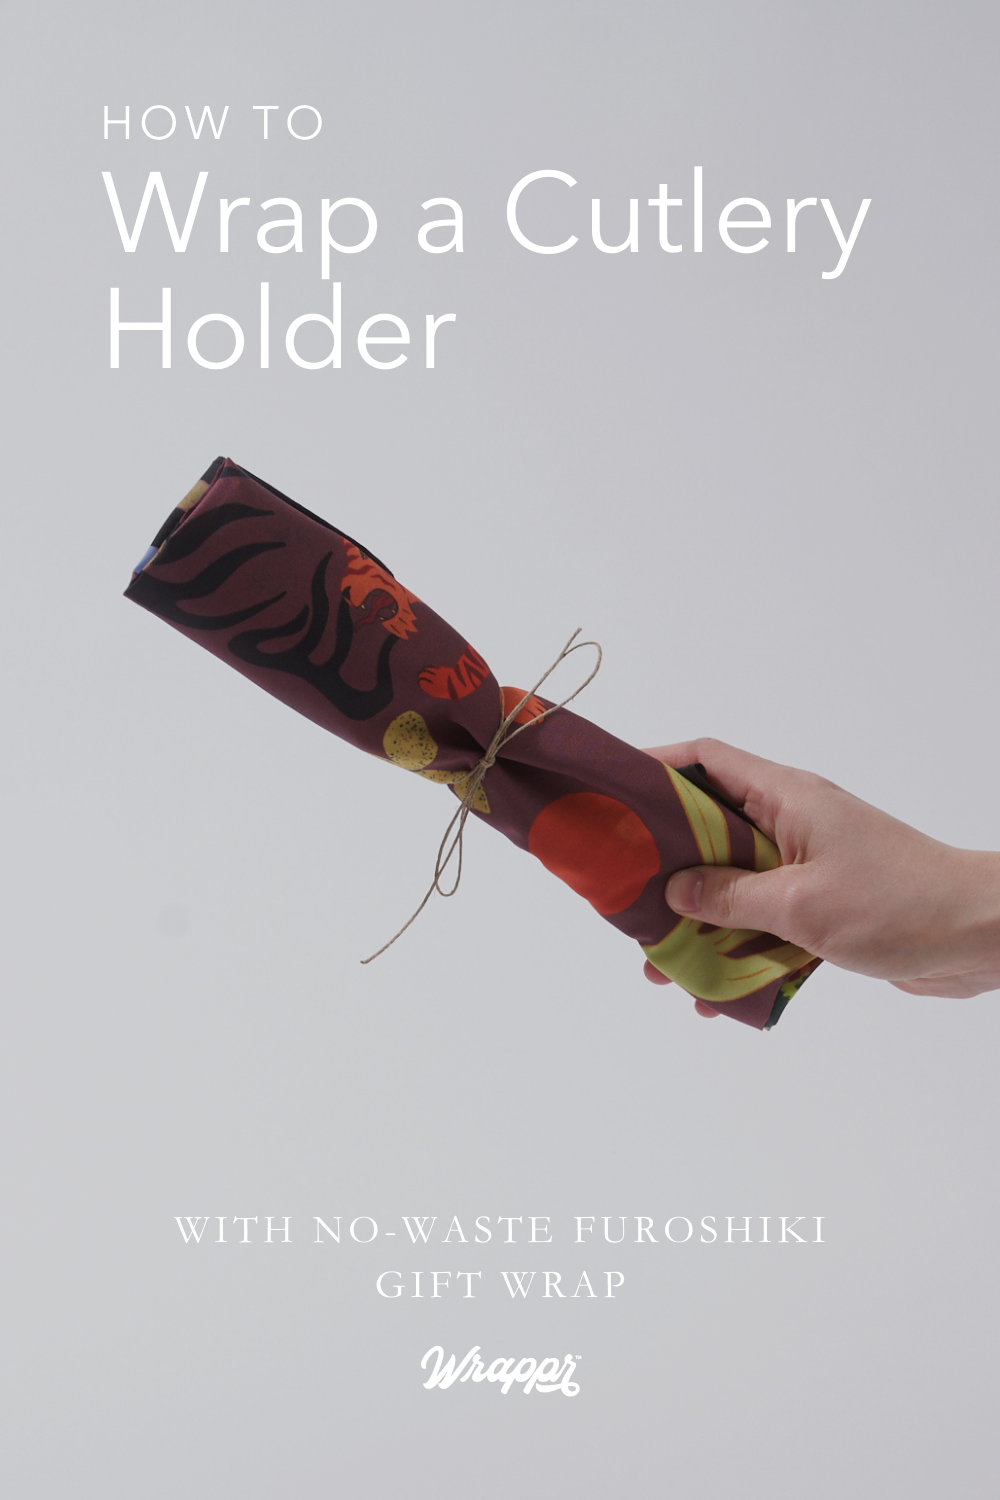 Wrappr Make a Cutlery Holder with Furoshiki Gift Wrap” width=